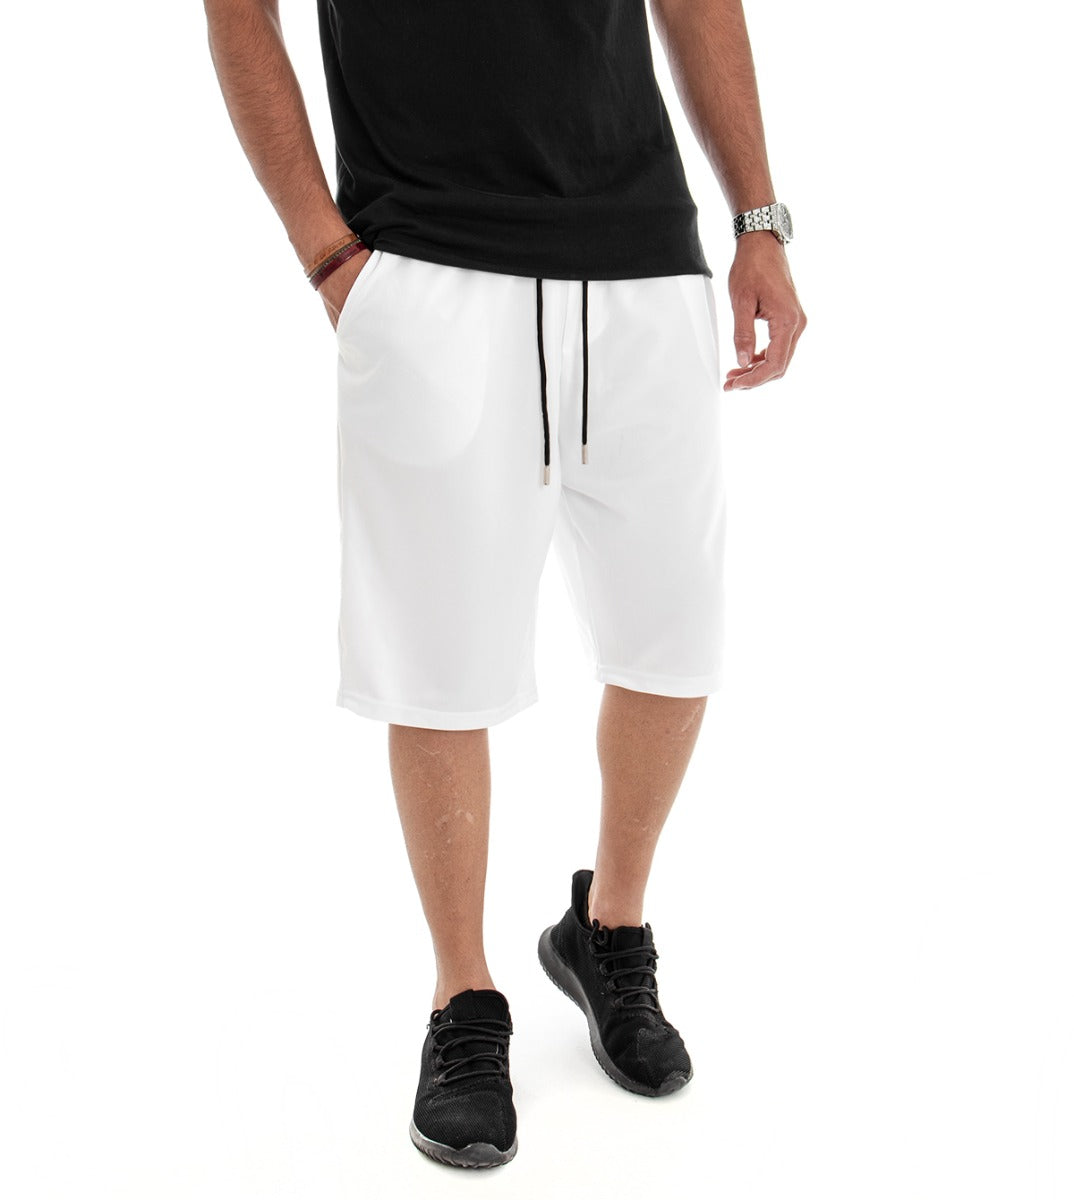 Bermuda Shorts Men's Tracksuit Over Solid Color White GIOSAL-PC1475A